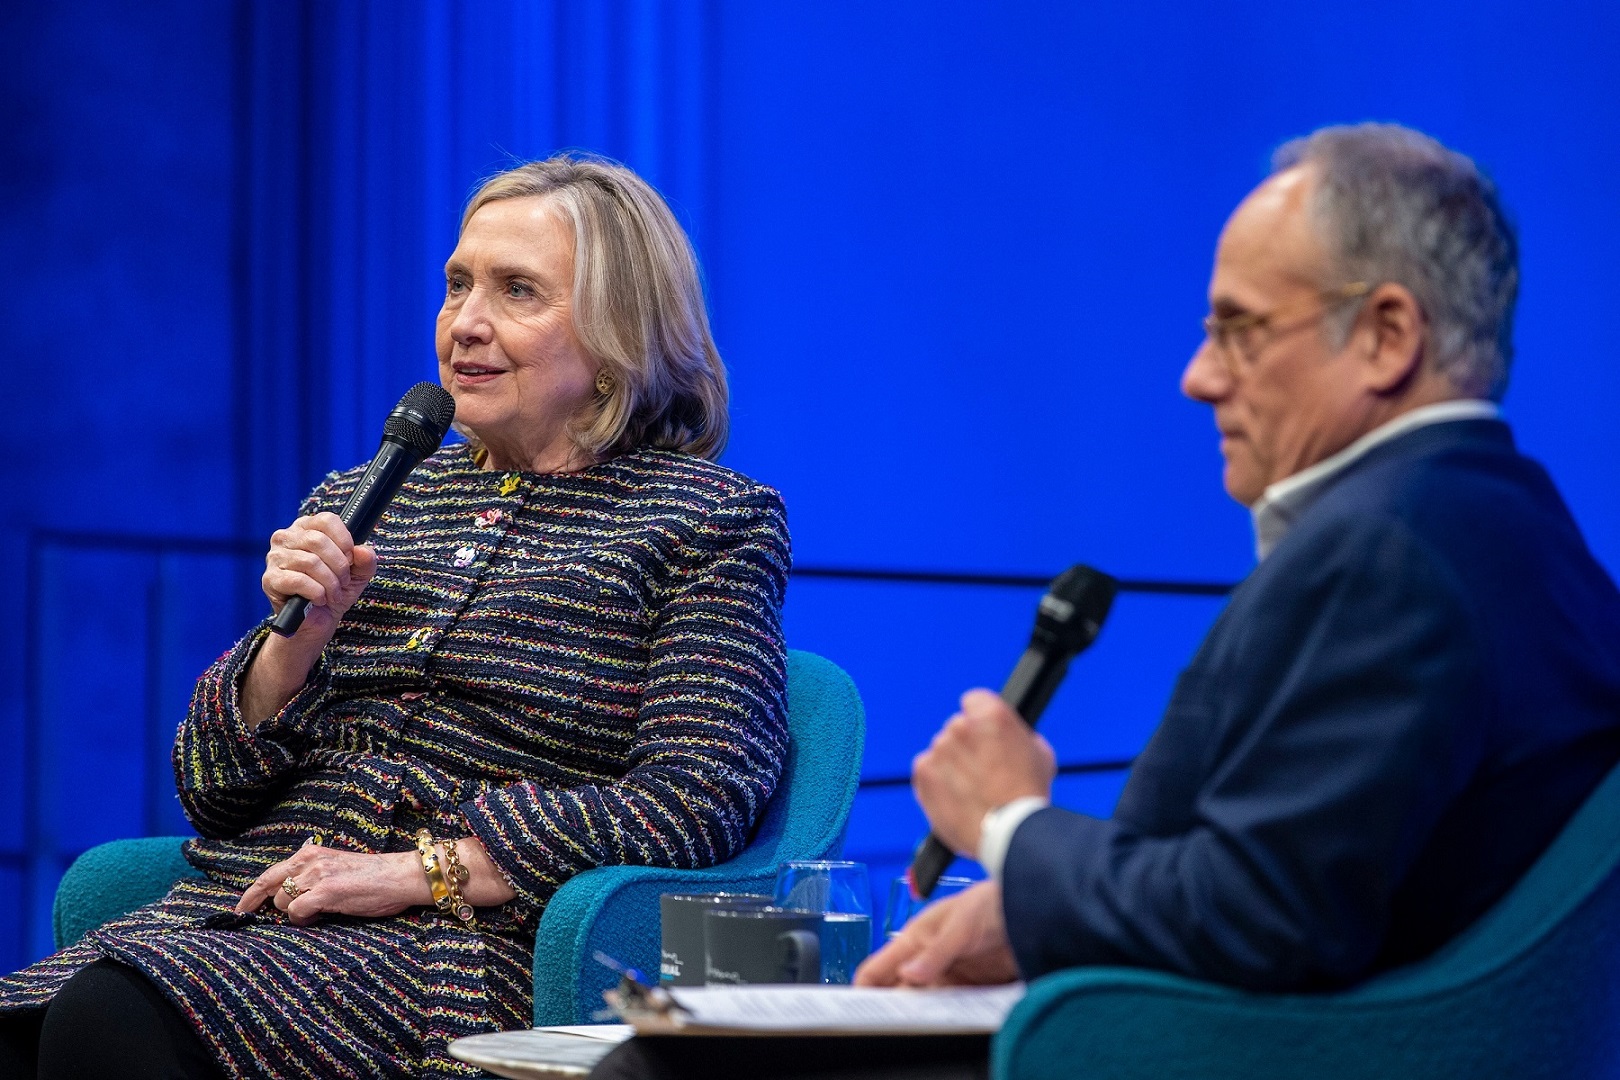 Hillary Rodham Clinton is seated, holding a microphone, to the left of a man in a navy blue suit and glasses, also with a microphone